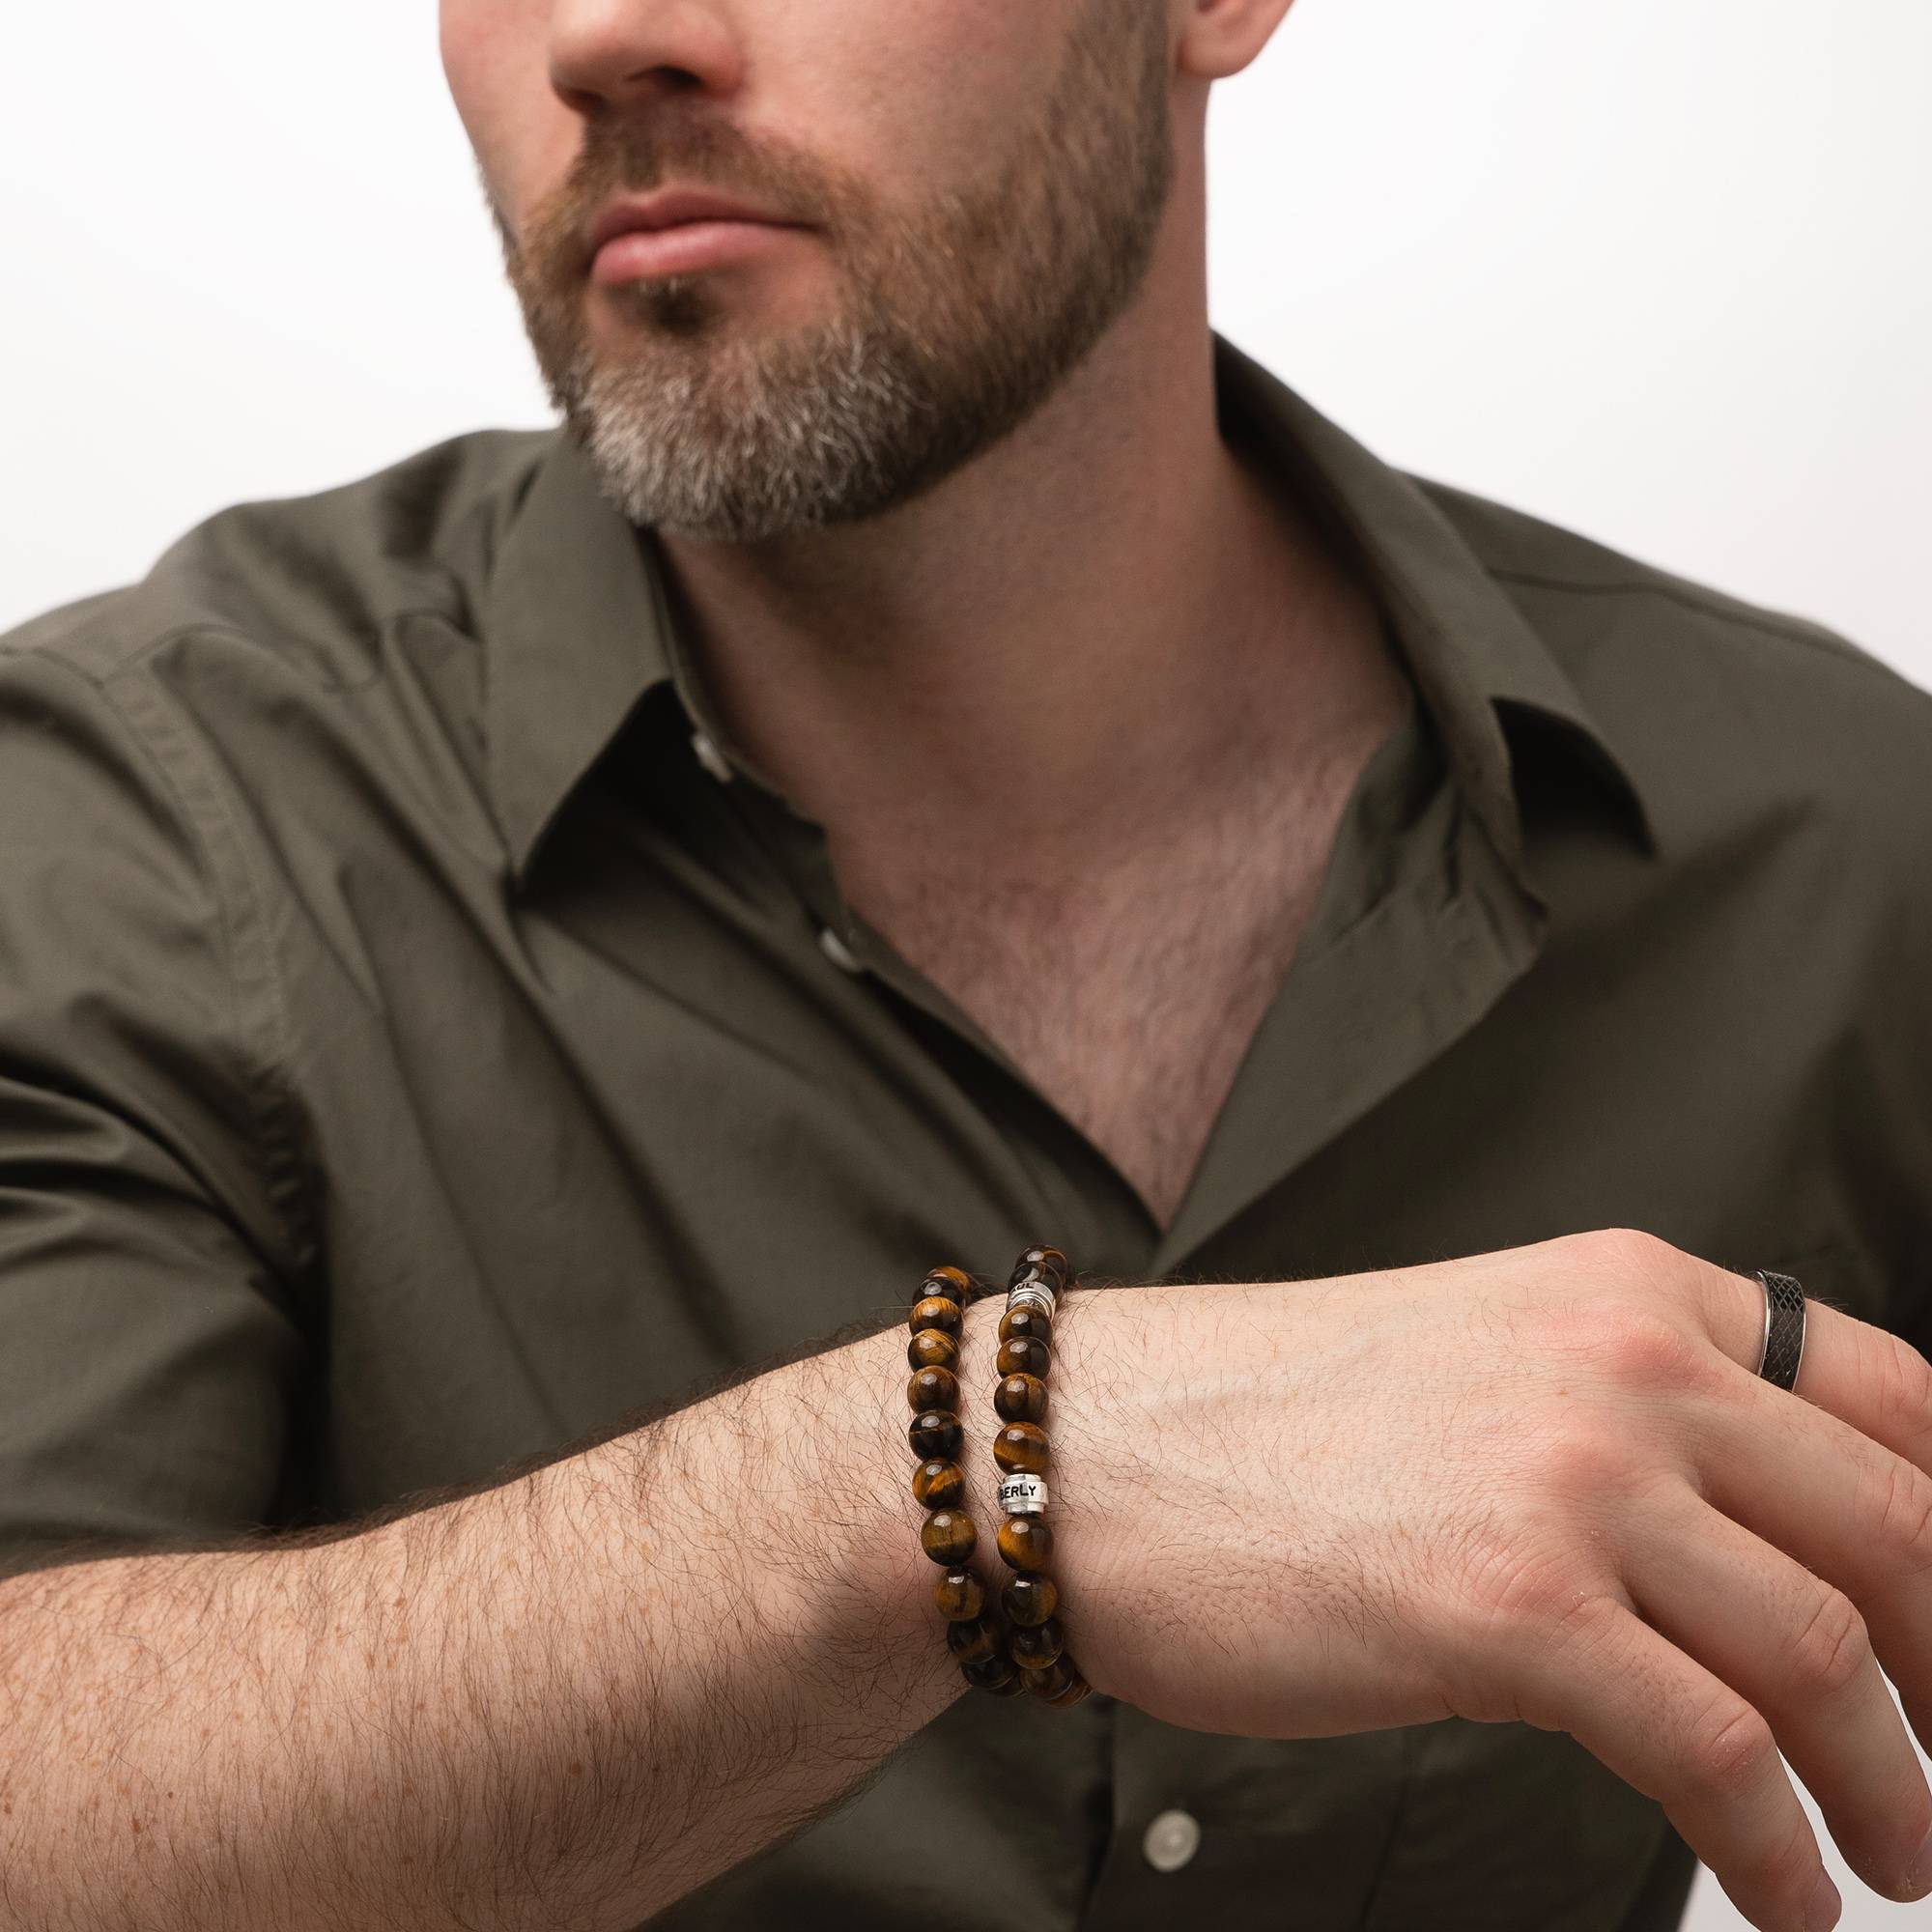 Leo Personalized Tiger Eye Bracelet for Men with Sterling Silver Beads-1 product photo